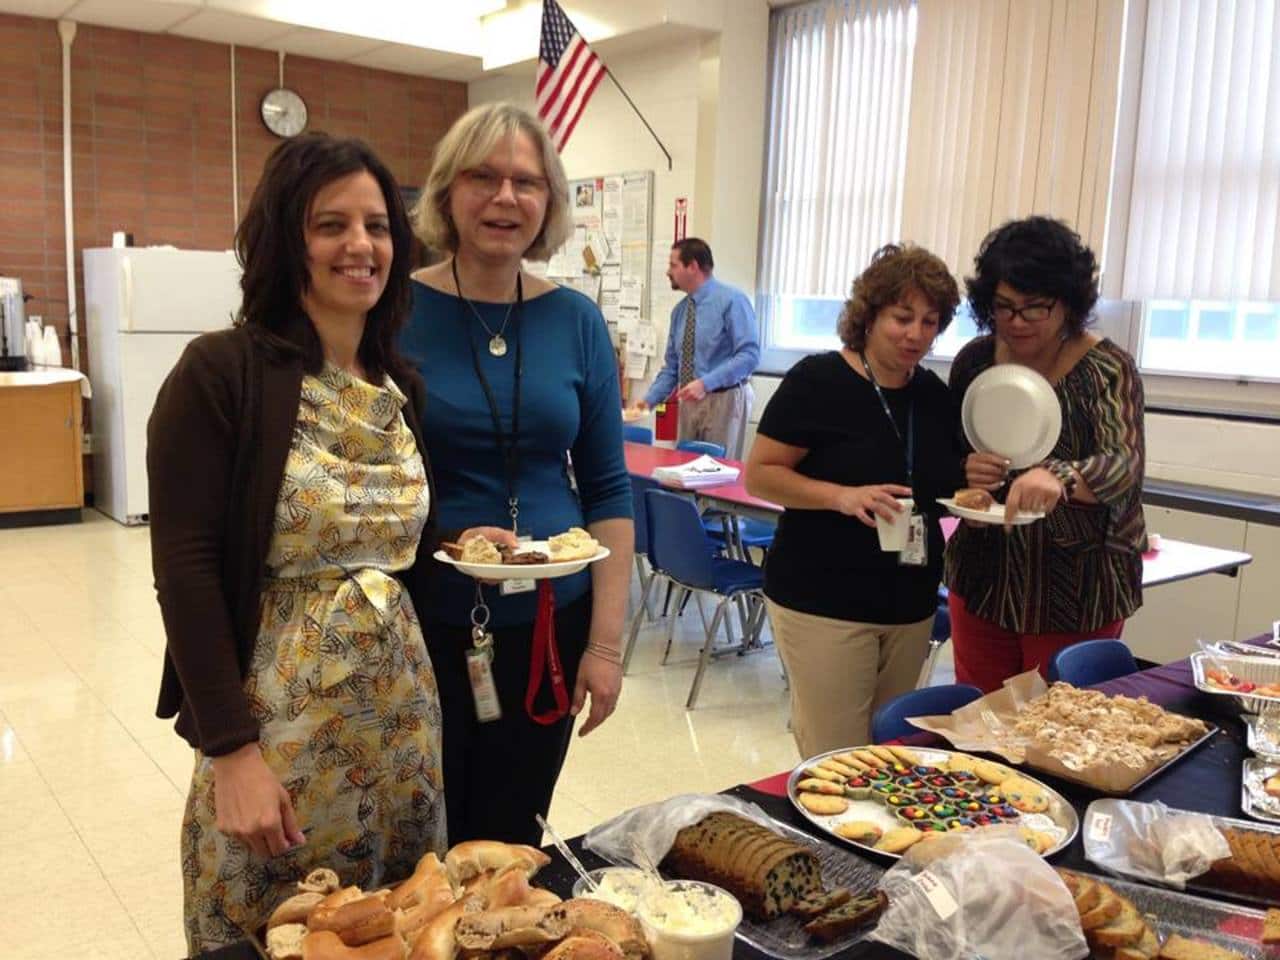 There will be a tricky tray Nov. 14 at Lakeland Regional High School in Wanaque.